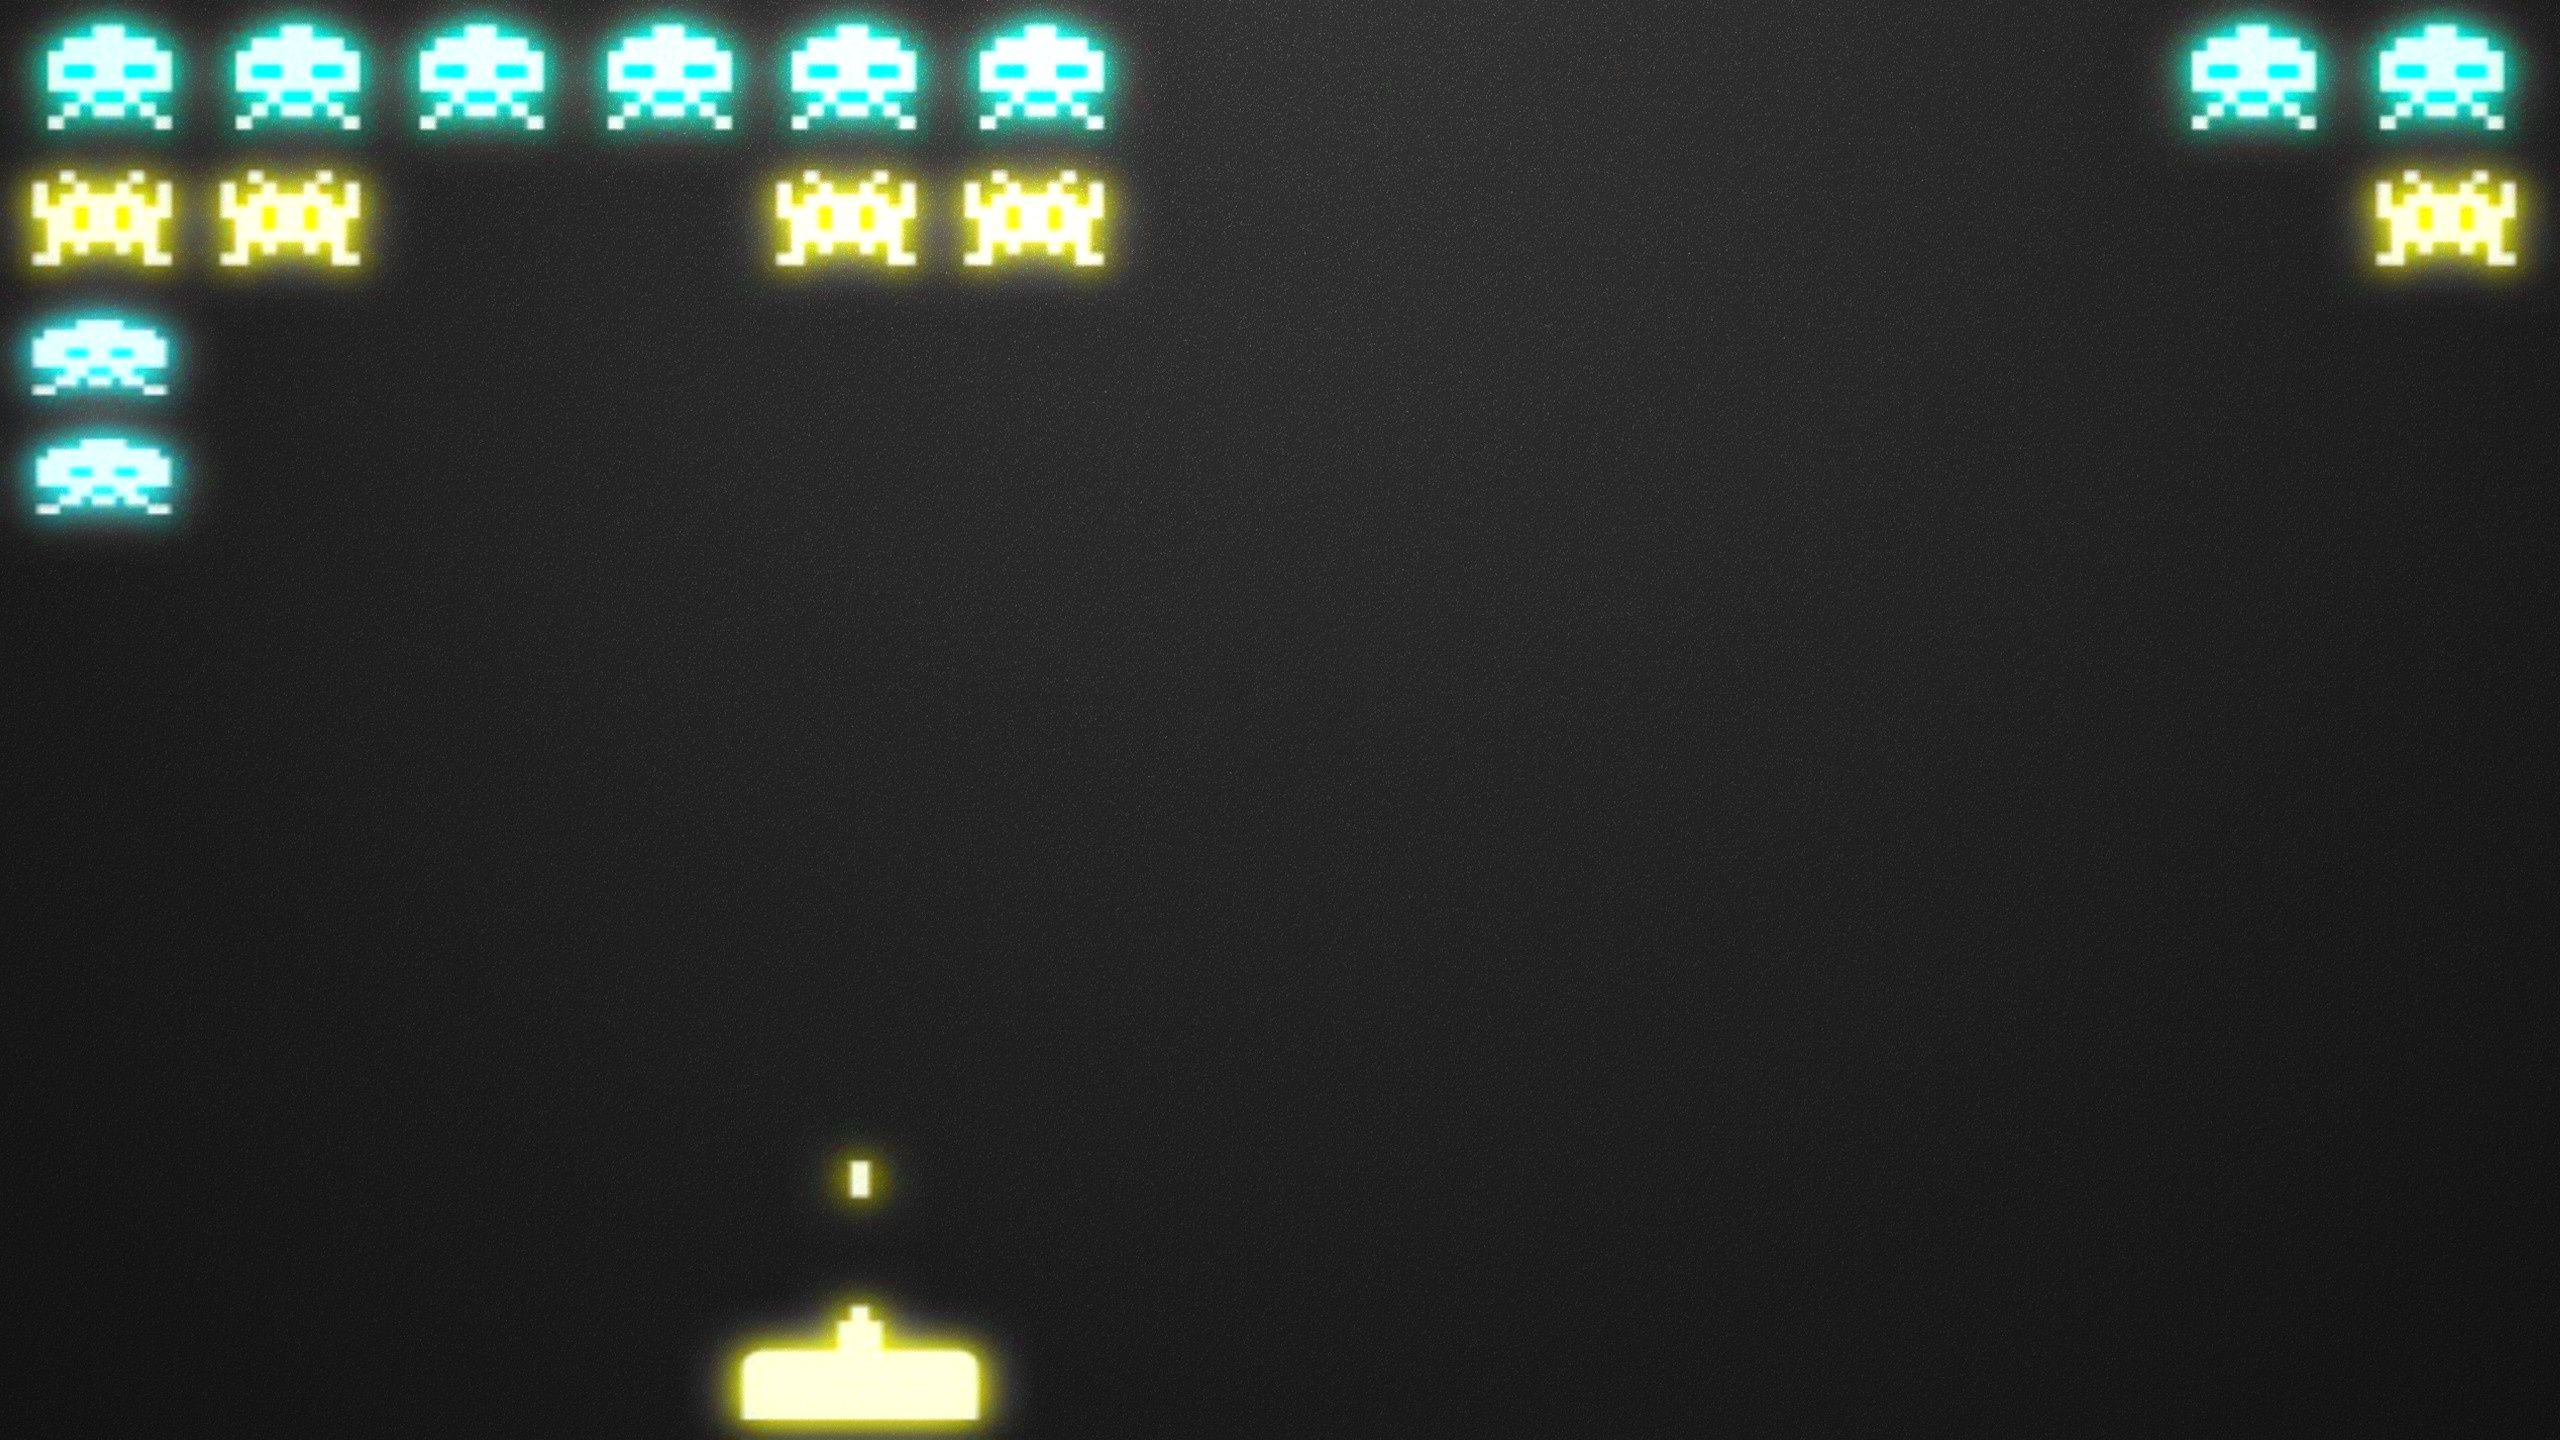 2560x1440 Free download Space Invaders Wallpaper Space Invaders [] for your Desktop, Mobile \u0026 Tablet | Explore 76+ Space Invaders Wallpaper | Space Invaders Wallpaper, Space Wallpapers, Wallpaper Space